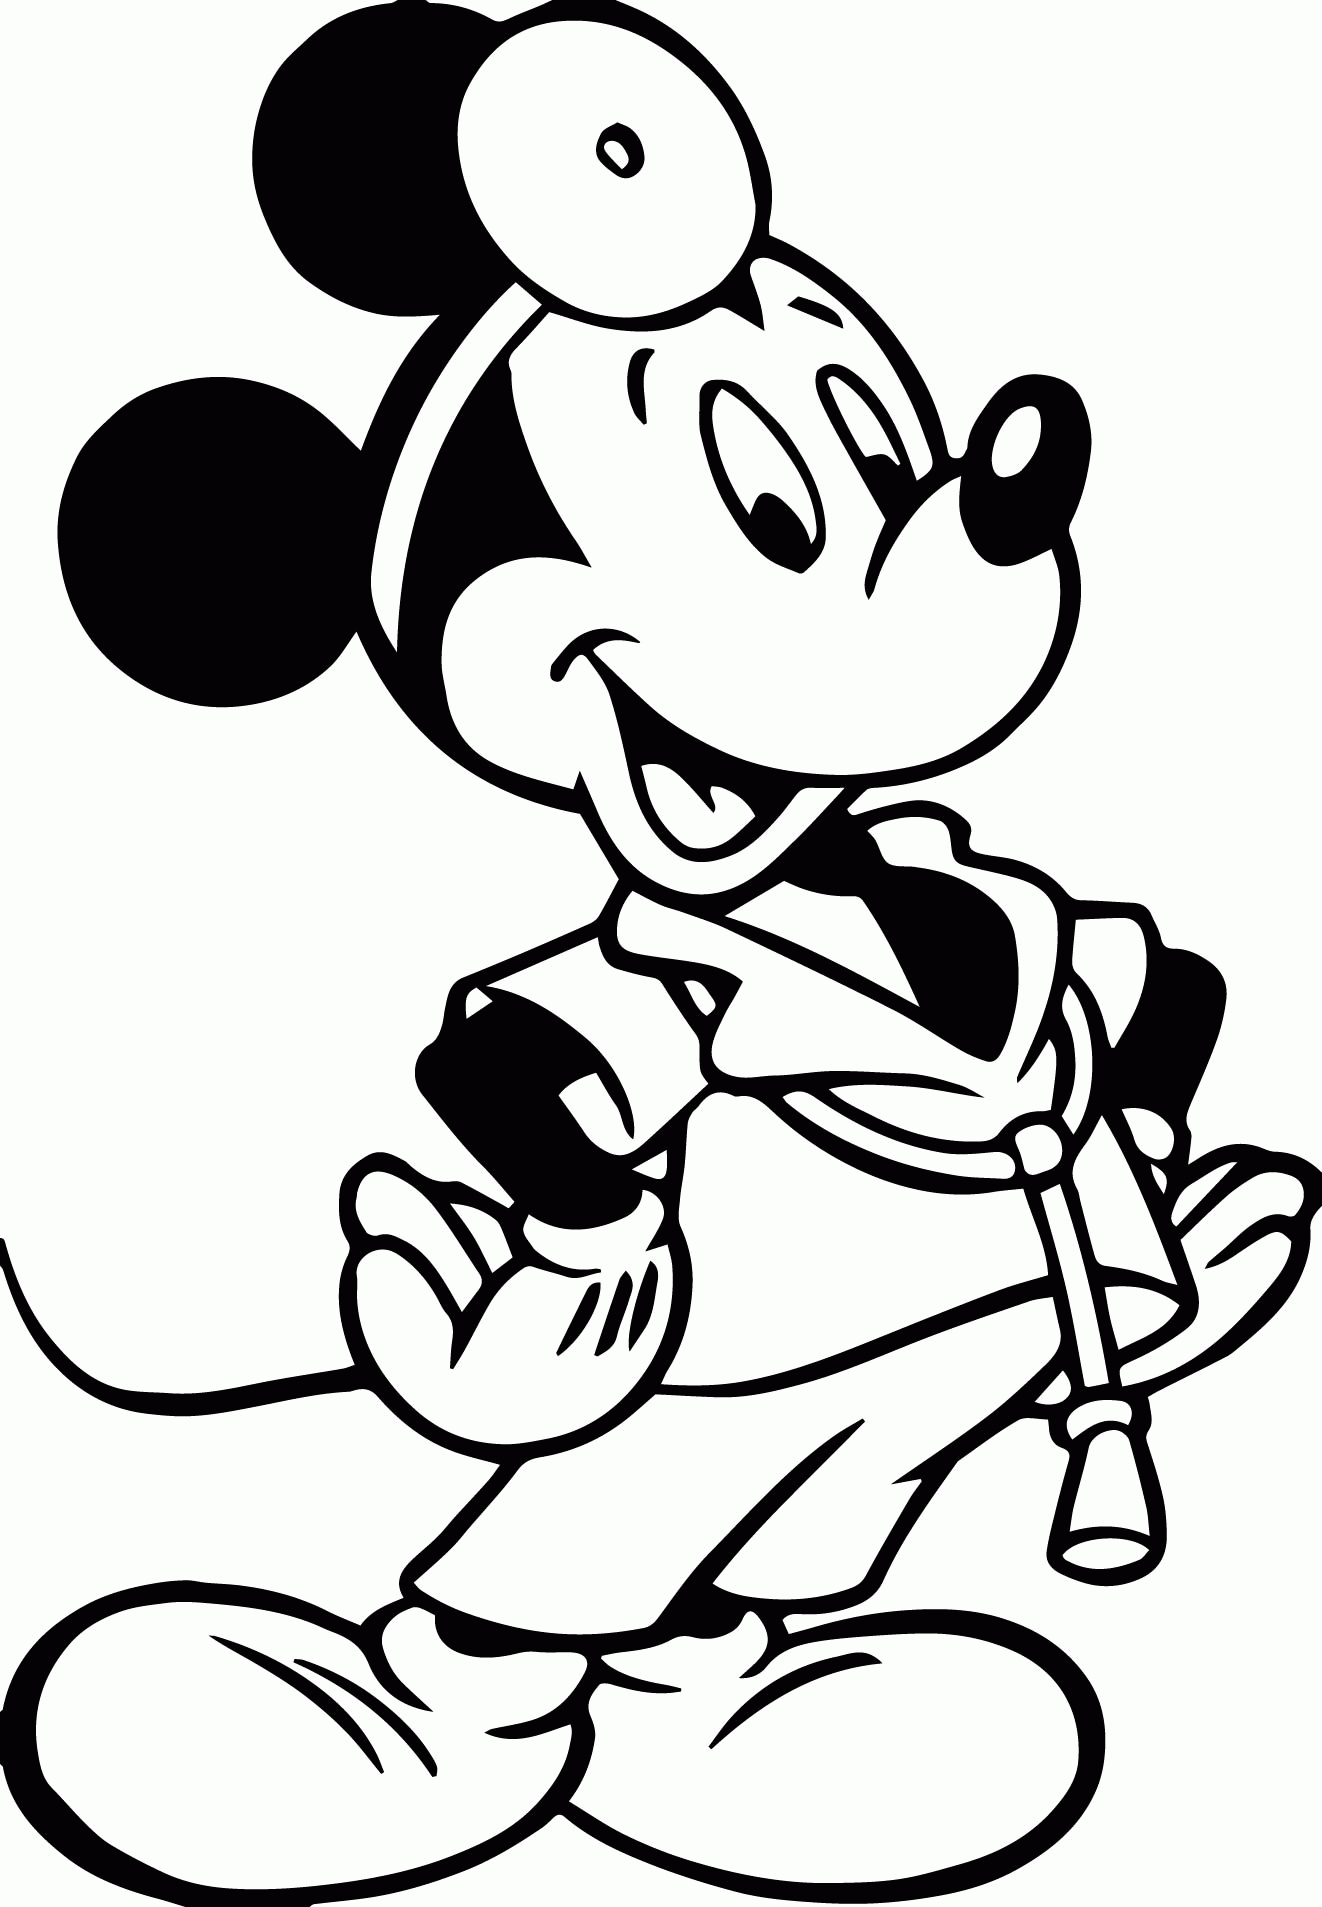 A Doctor Coloring Page Printable Sheets Mickey A Doctor Page 2021 a 0243 Coloring4free